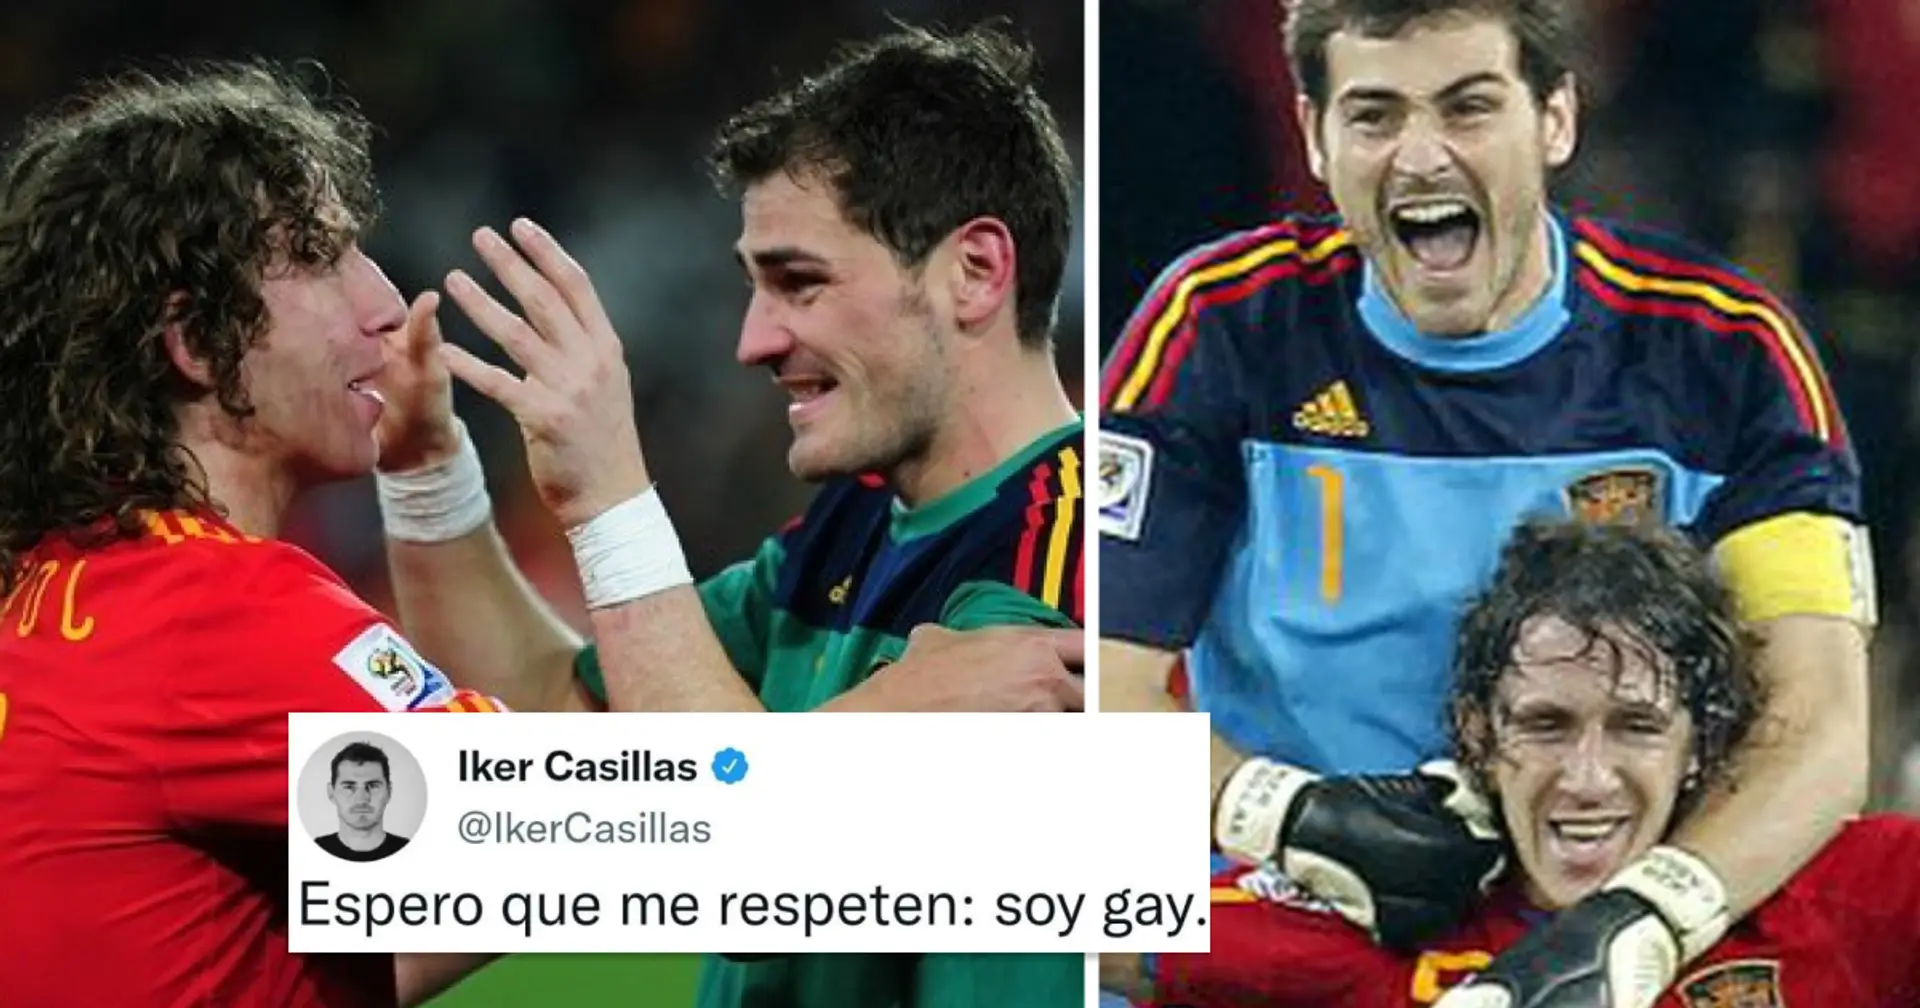 Casillas tweets 'I'm gay', Puyol replies with 'It's time to tell our story, Iker'